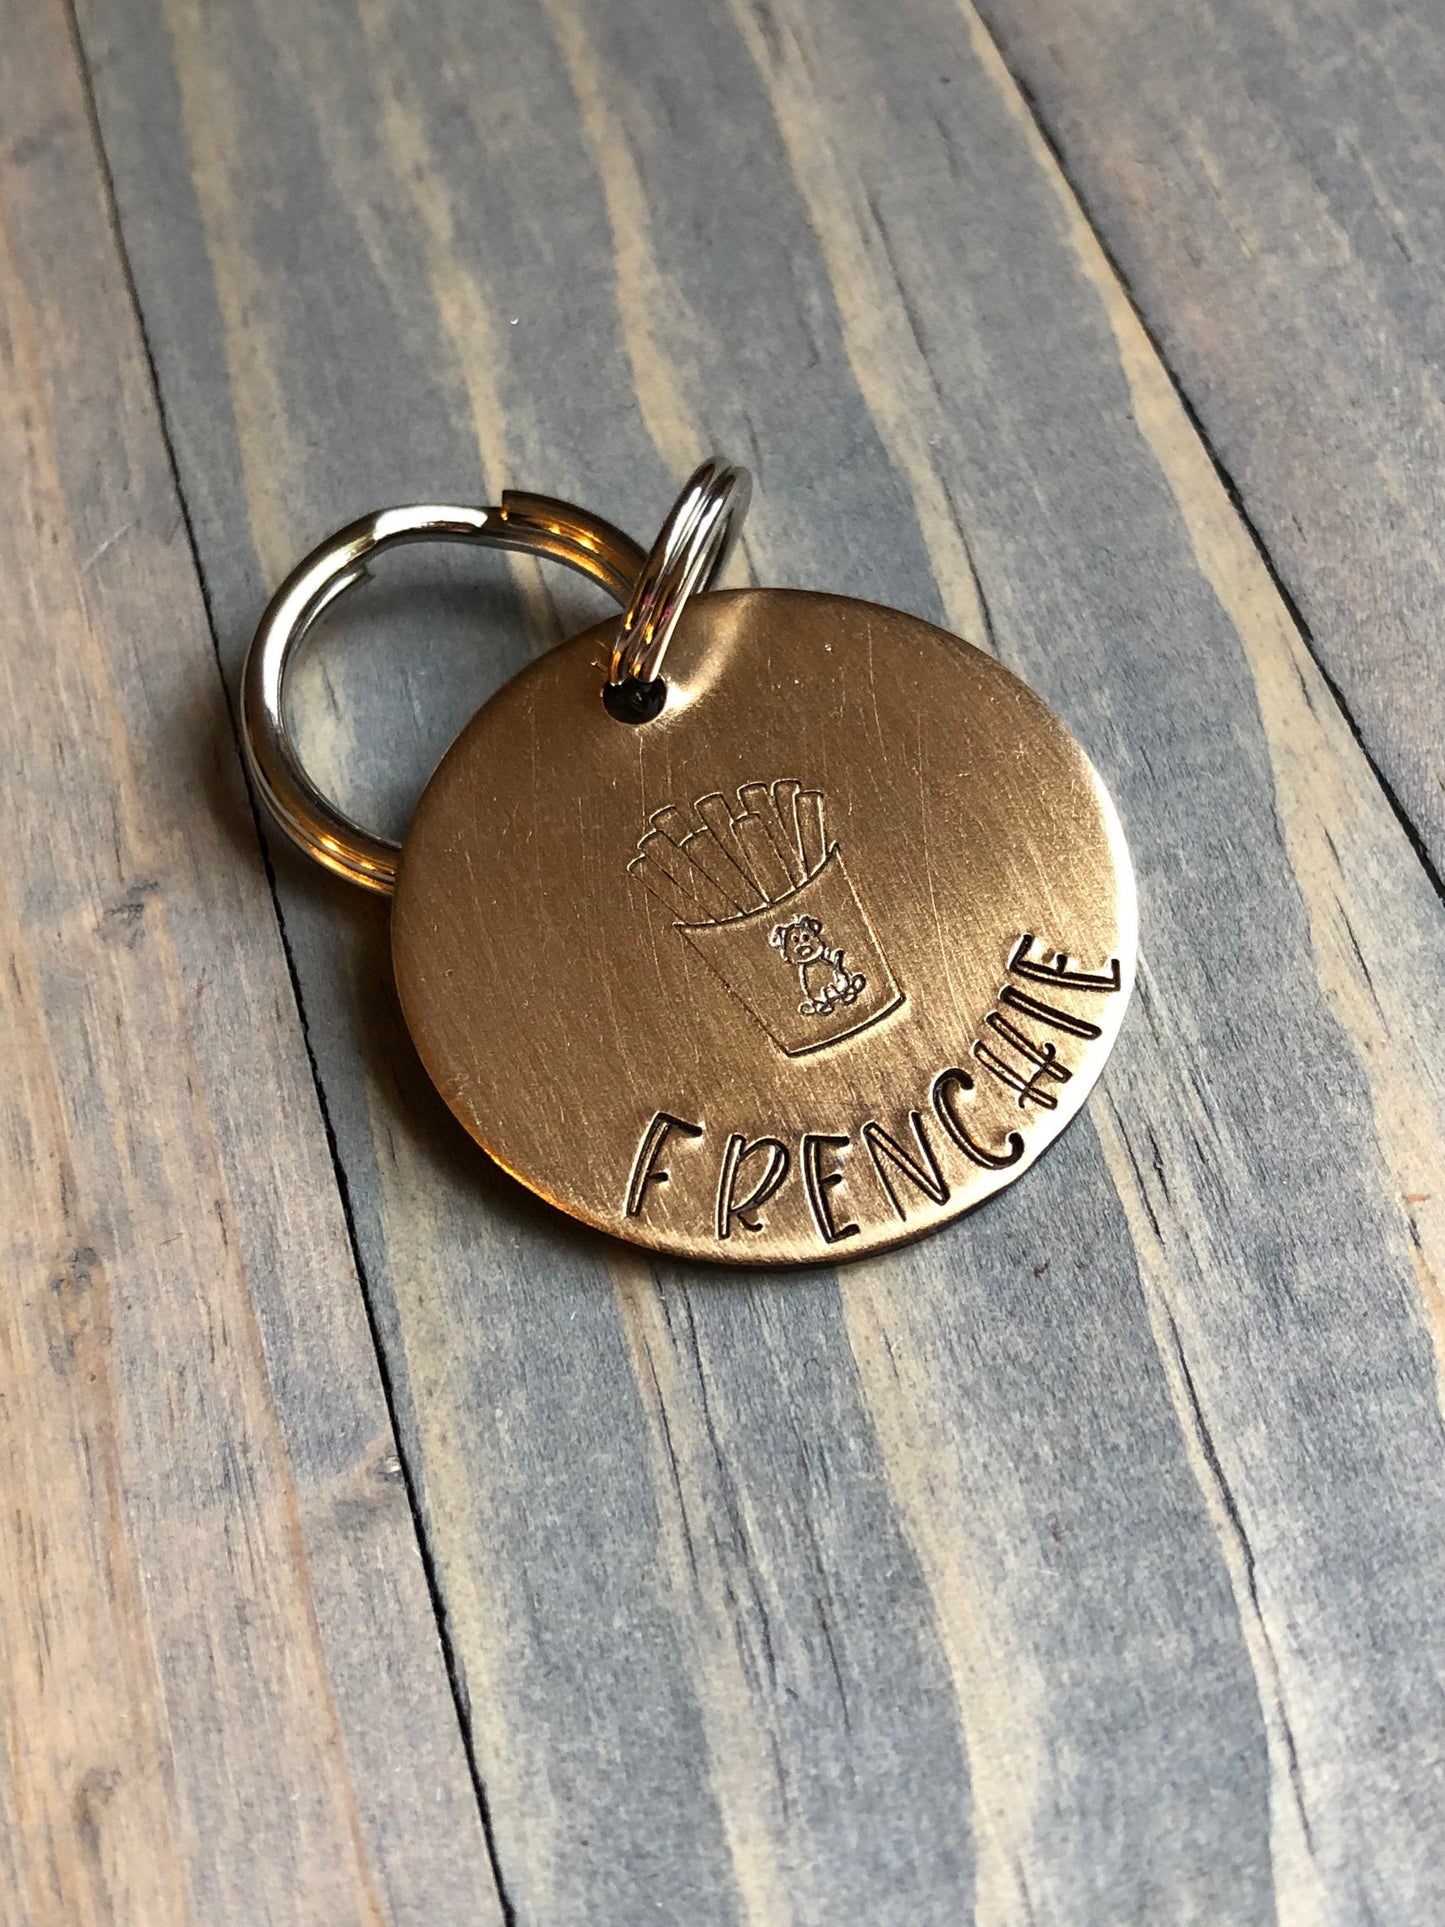 Custom French Fry Dog Tag, Hand Stamped Pet ID, Personalized Dog Tag for Dog, French Bulldog Dog Tag, Poodle Dog Tag